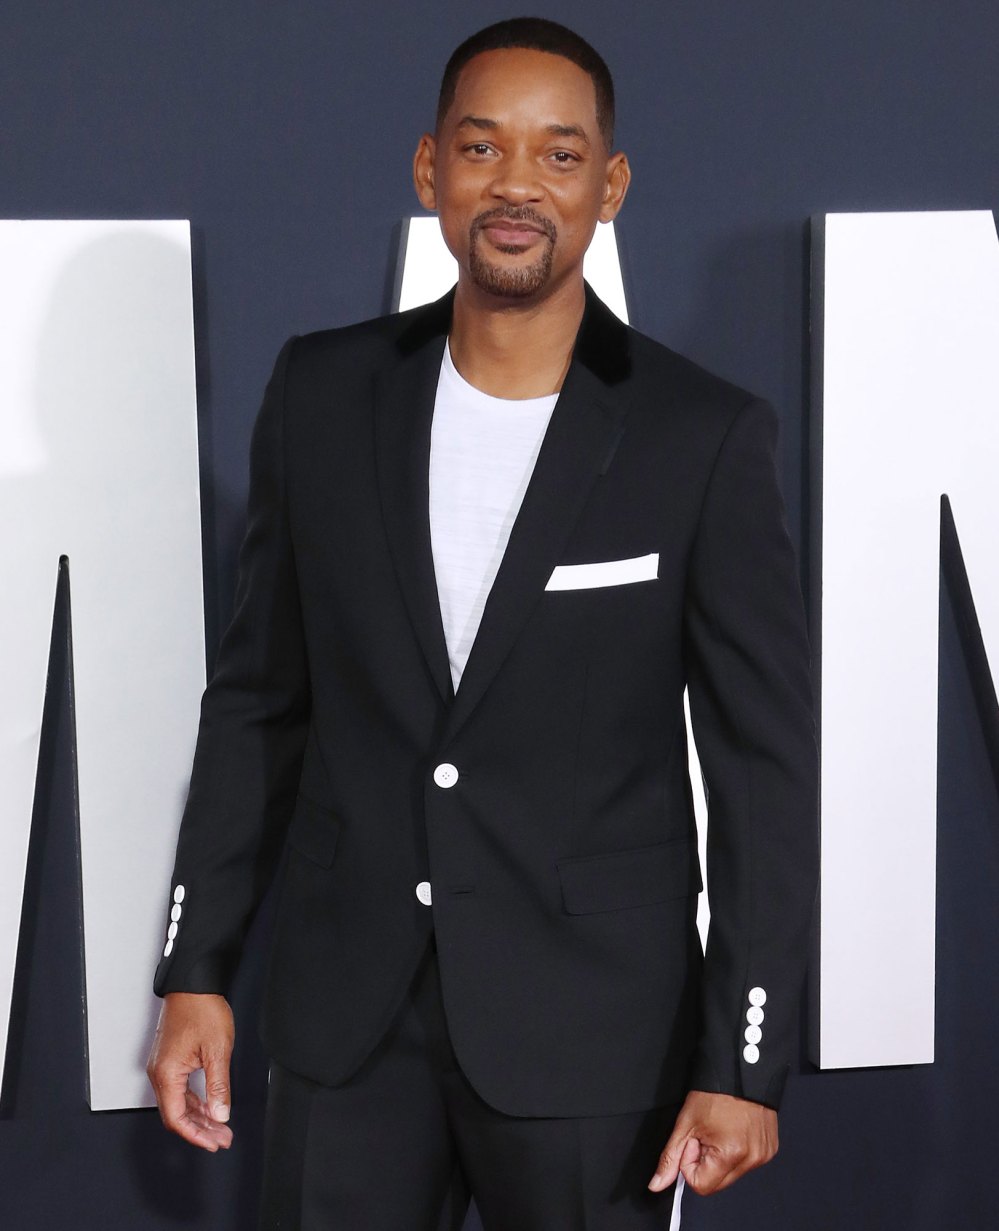 Will Smiths Biggest Fear Is Being Fully Canceled Following Oscars Slap